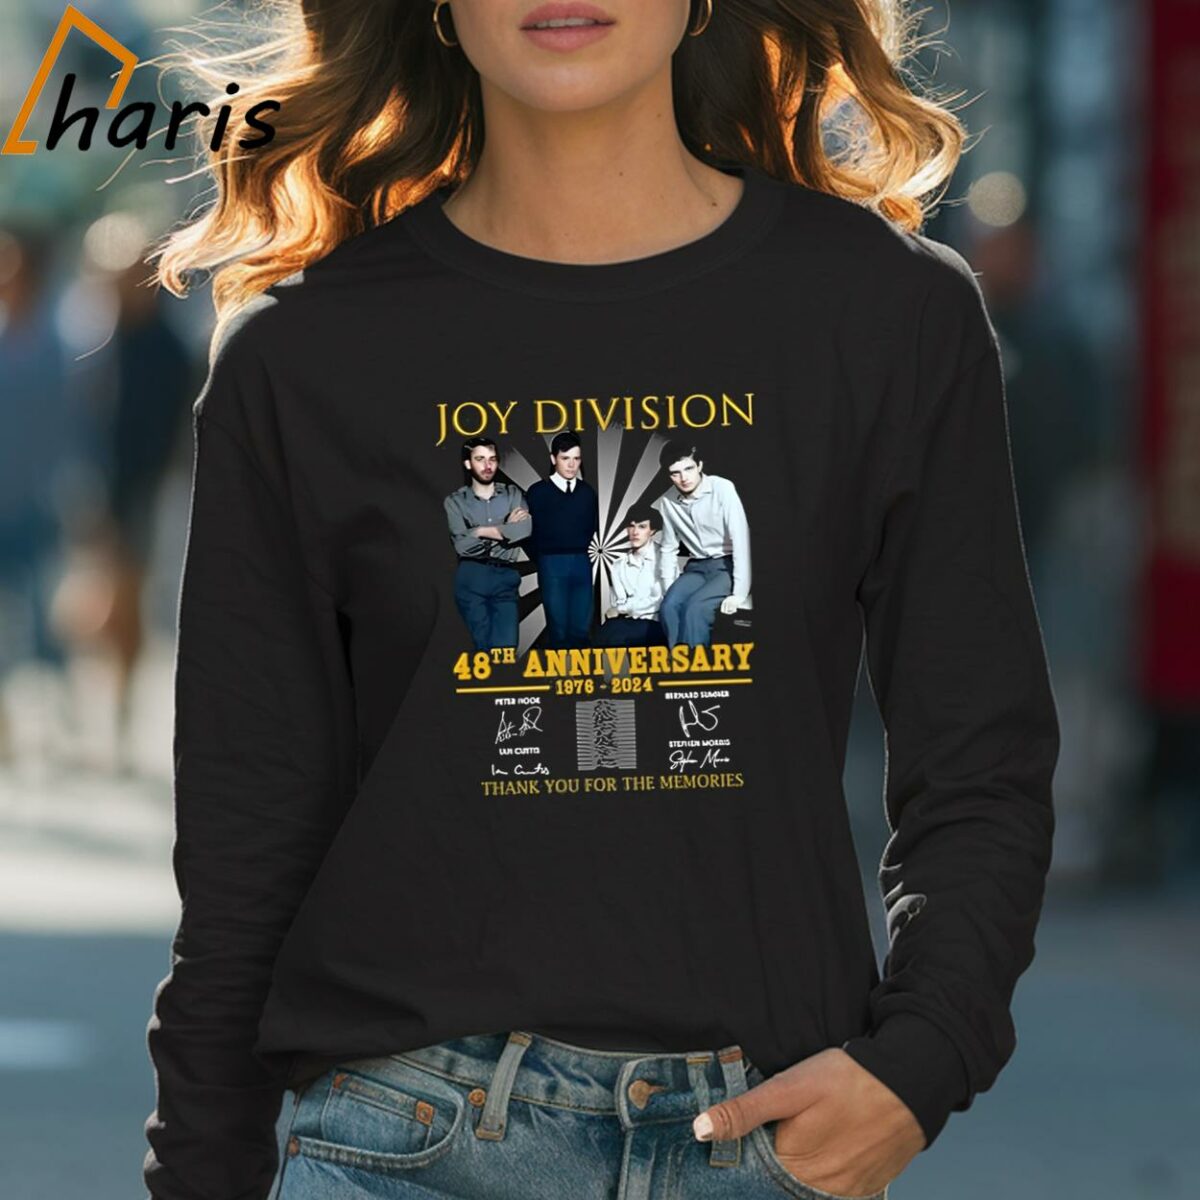 Joy Division 48th Anniversary 1976 2024 Thank You For The Memories Signatures T shirt 4 Long sleeve shirt